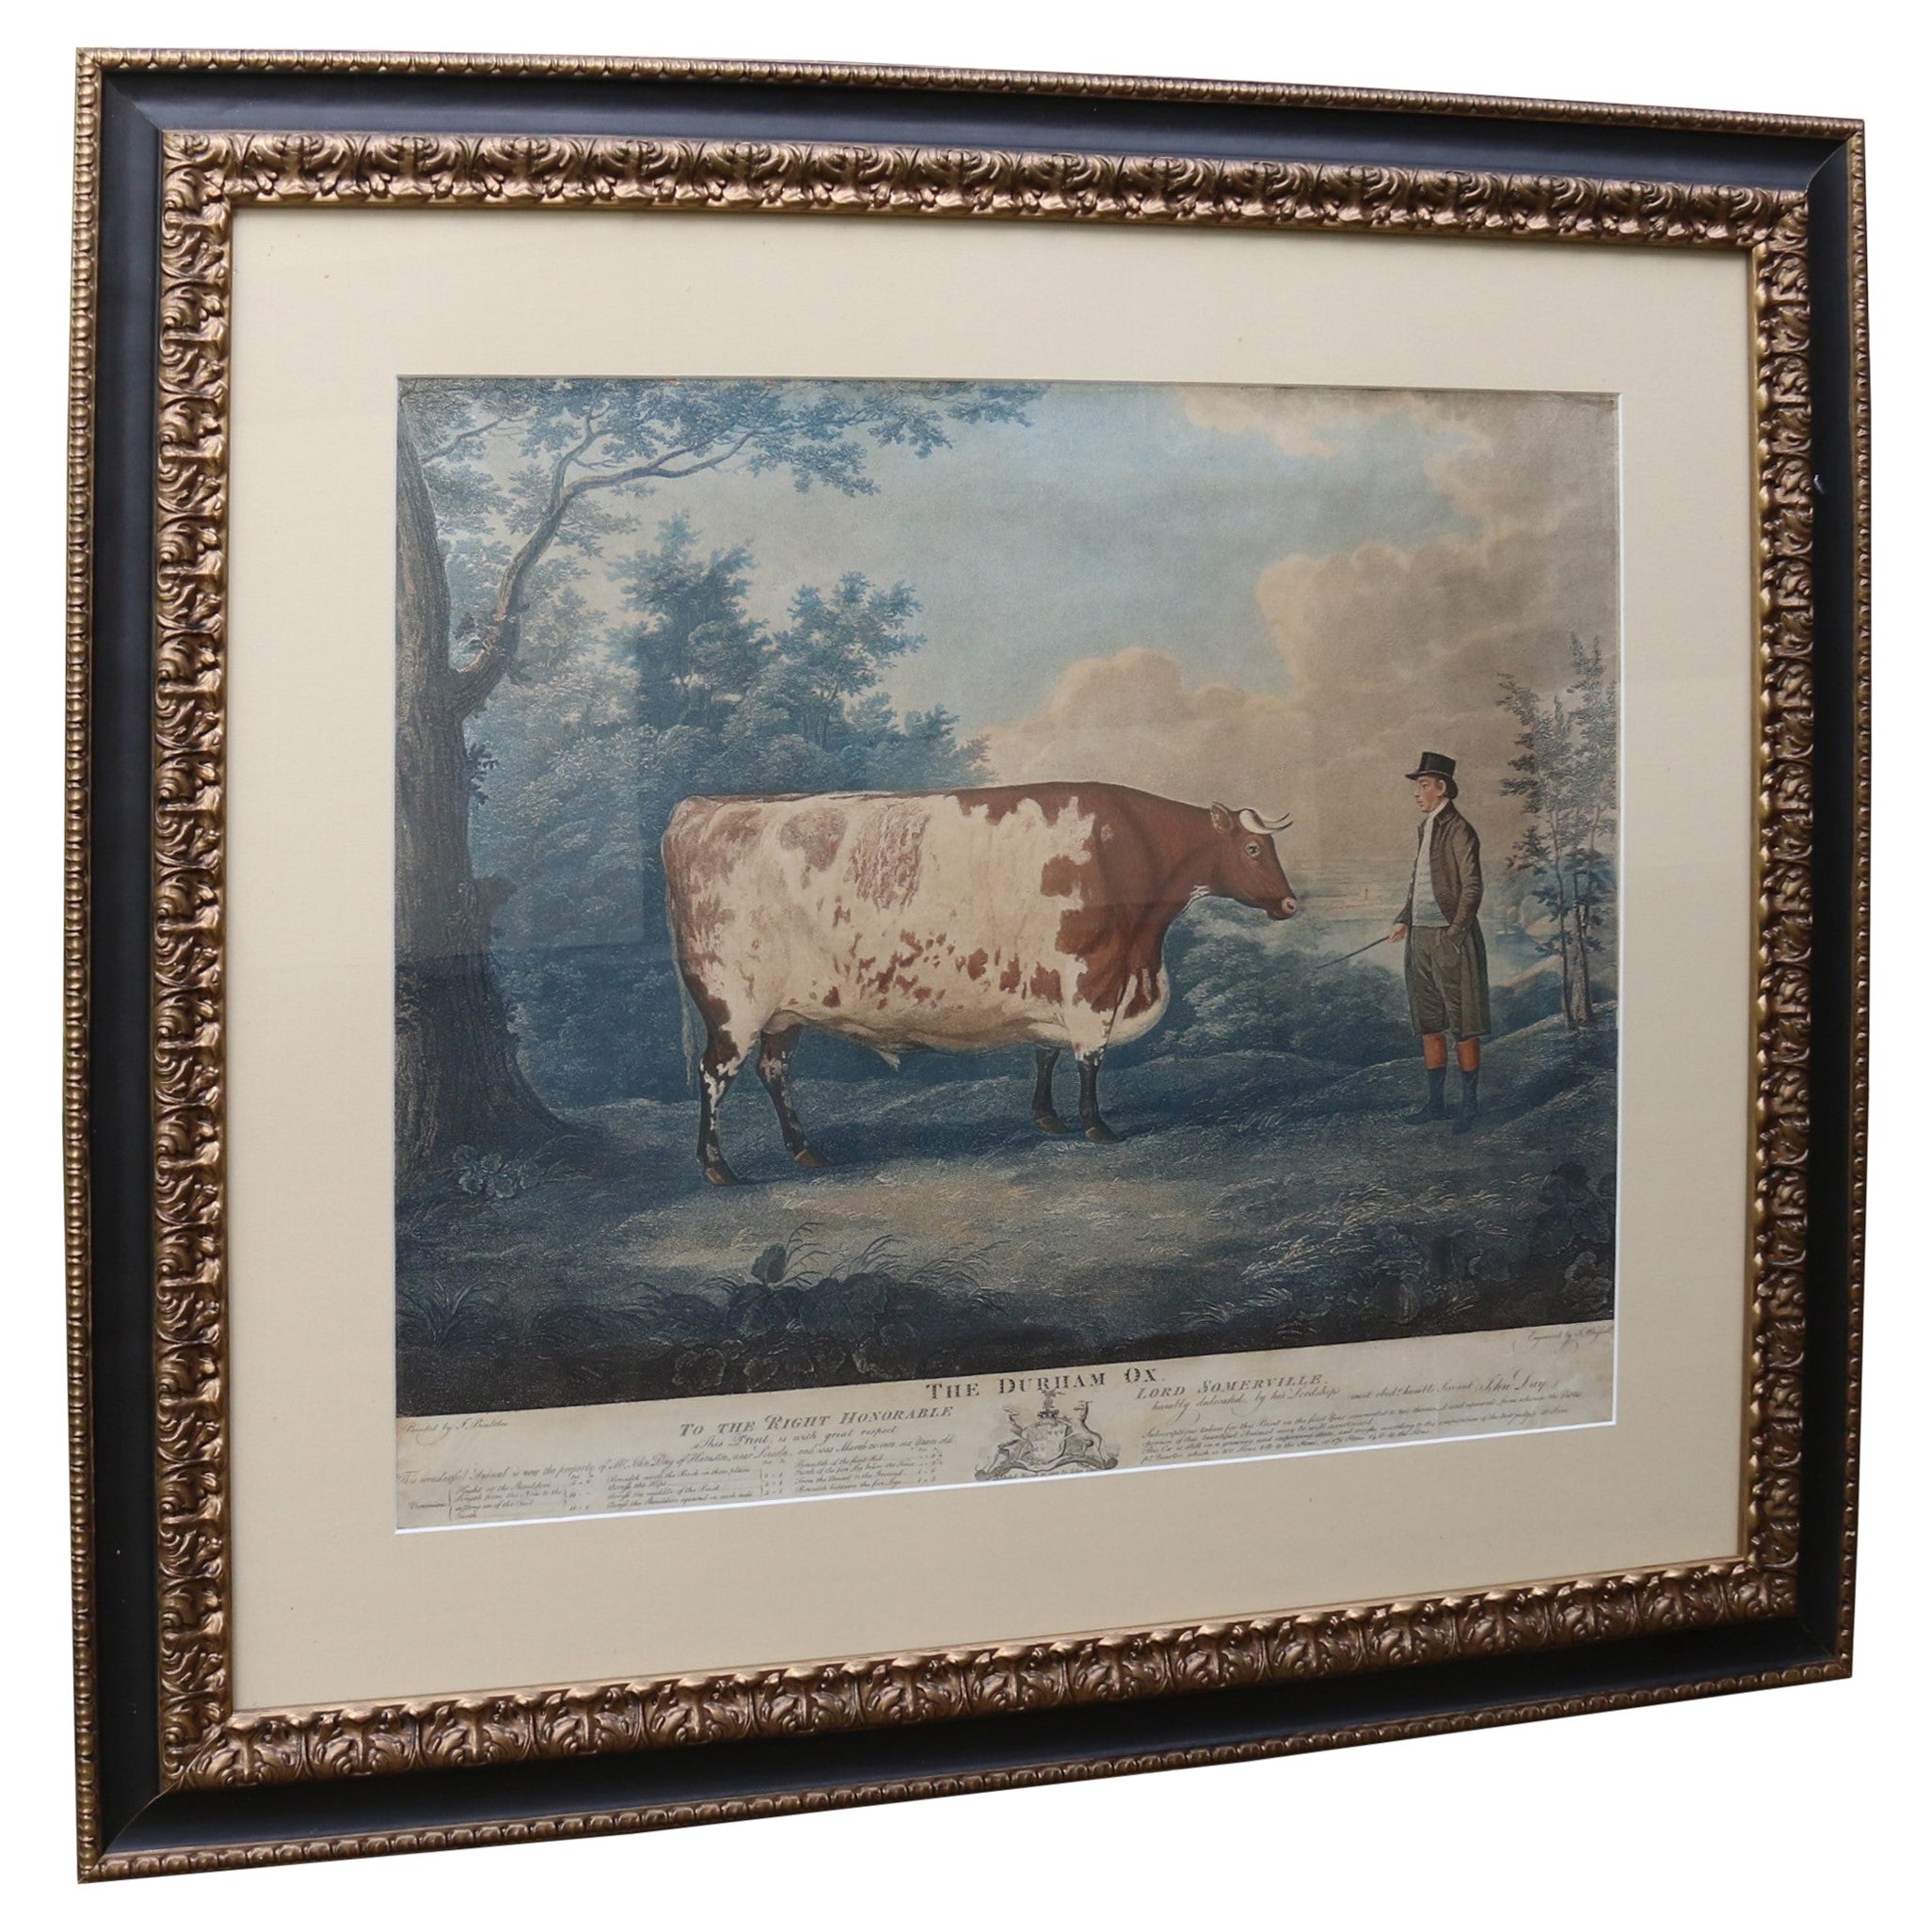 John Boultbee "The Durham Ox", hand coloured engraving dated 1802, English  For Sale